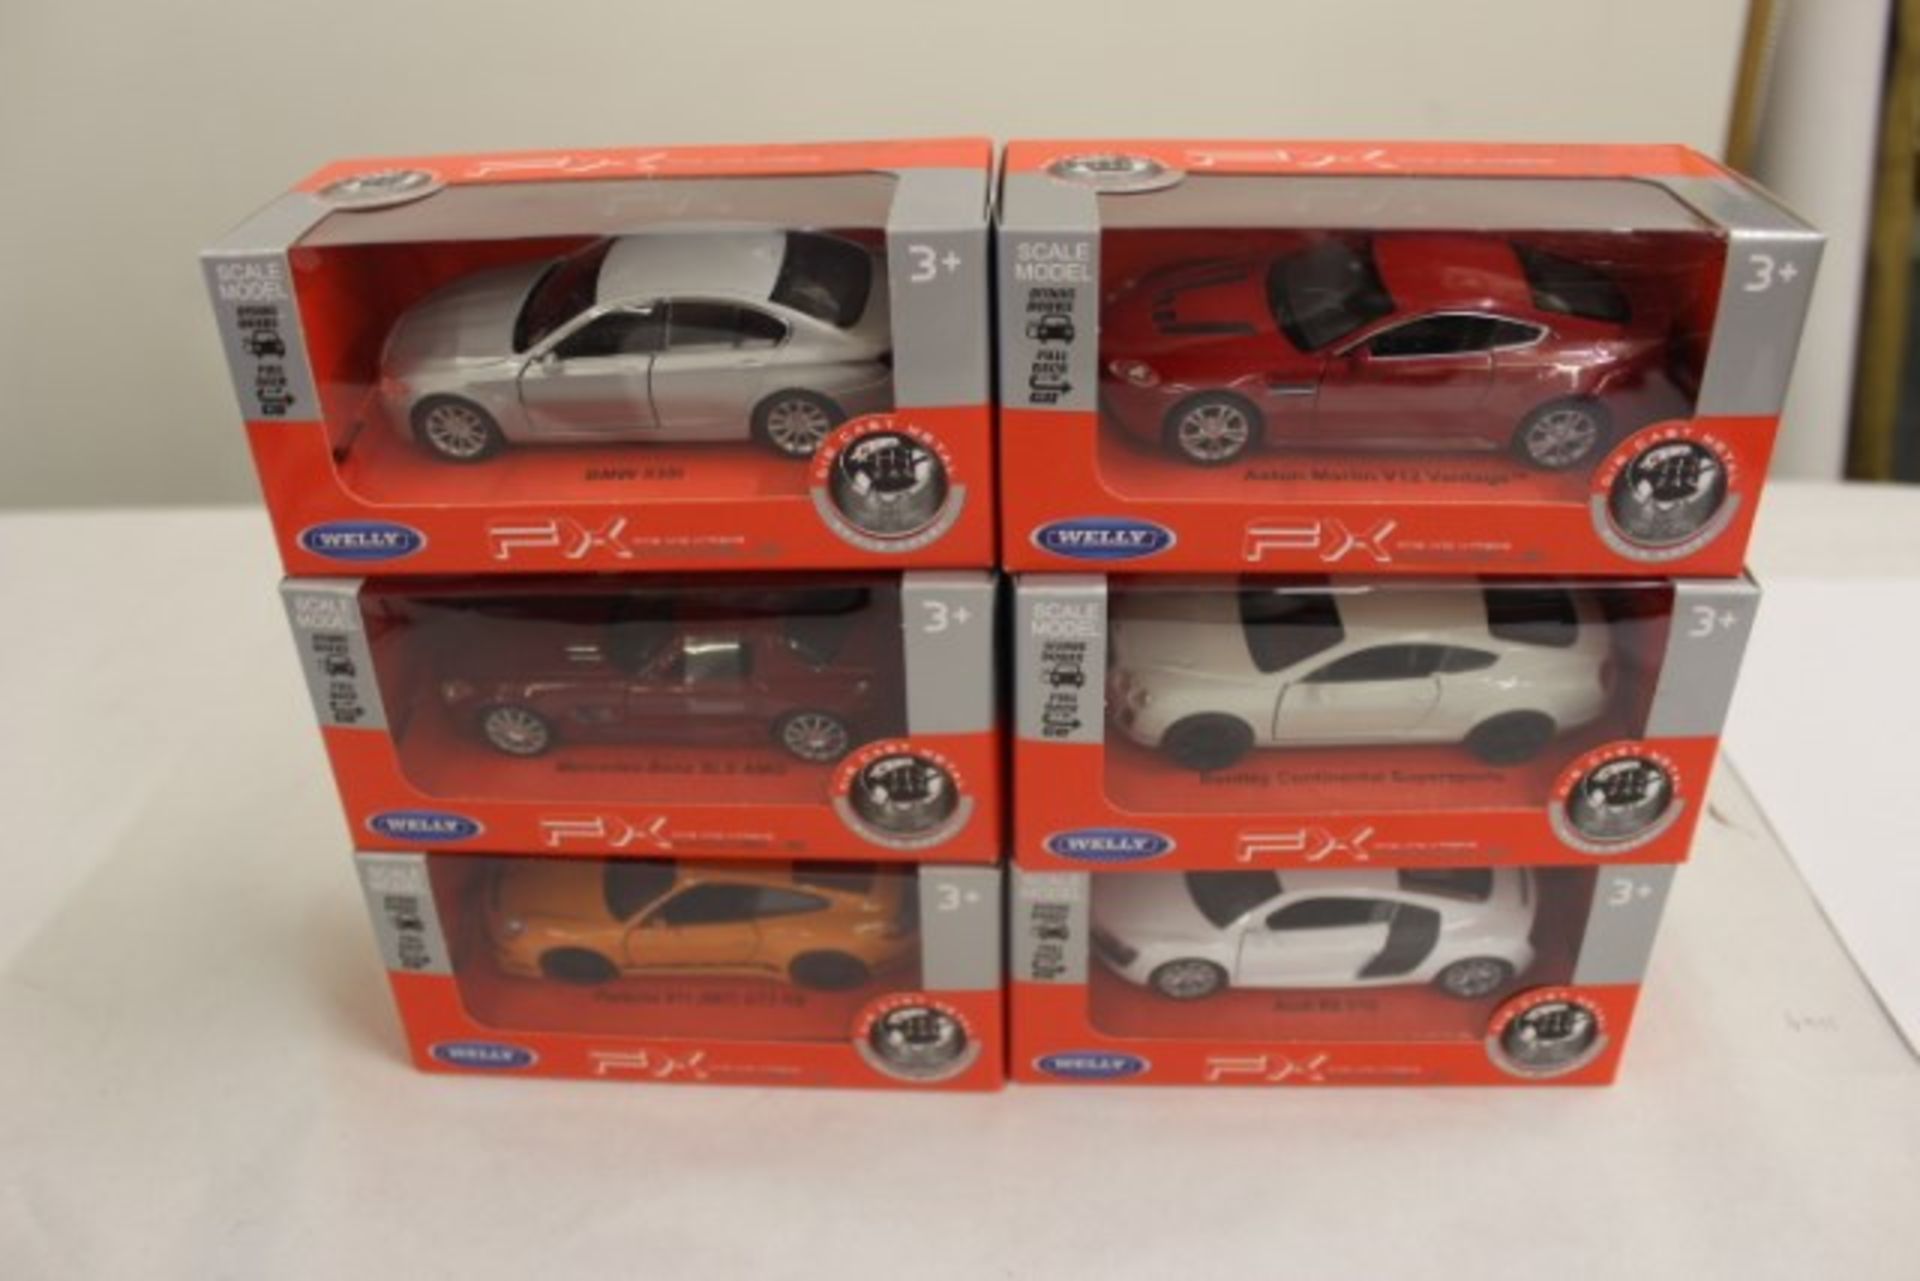 V 1:38 Scale Die Cast Model Sports Cars (1 of 6 various)